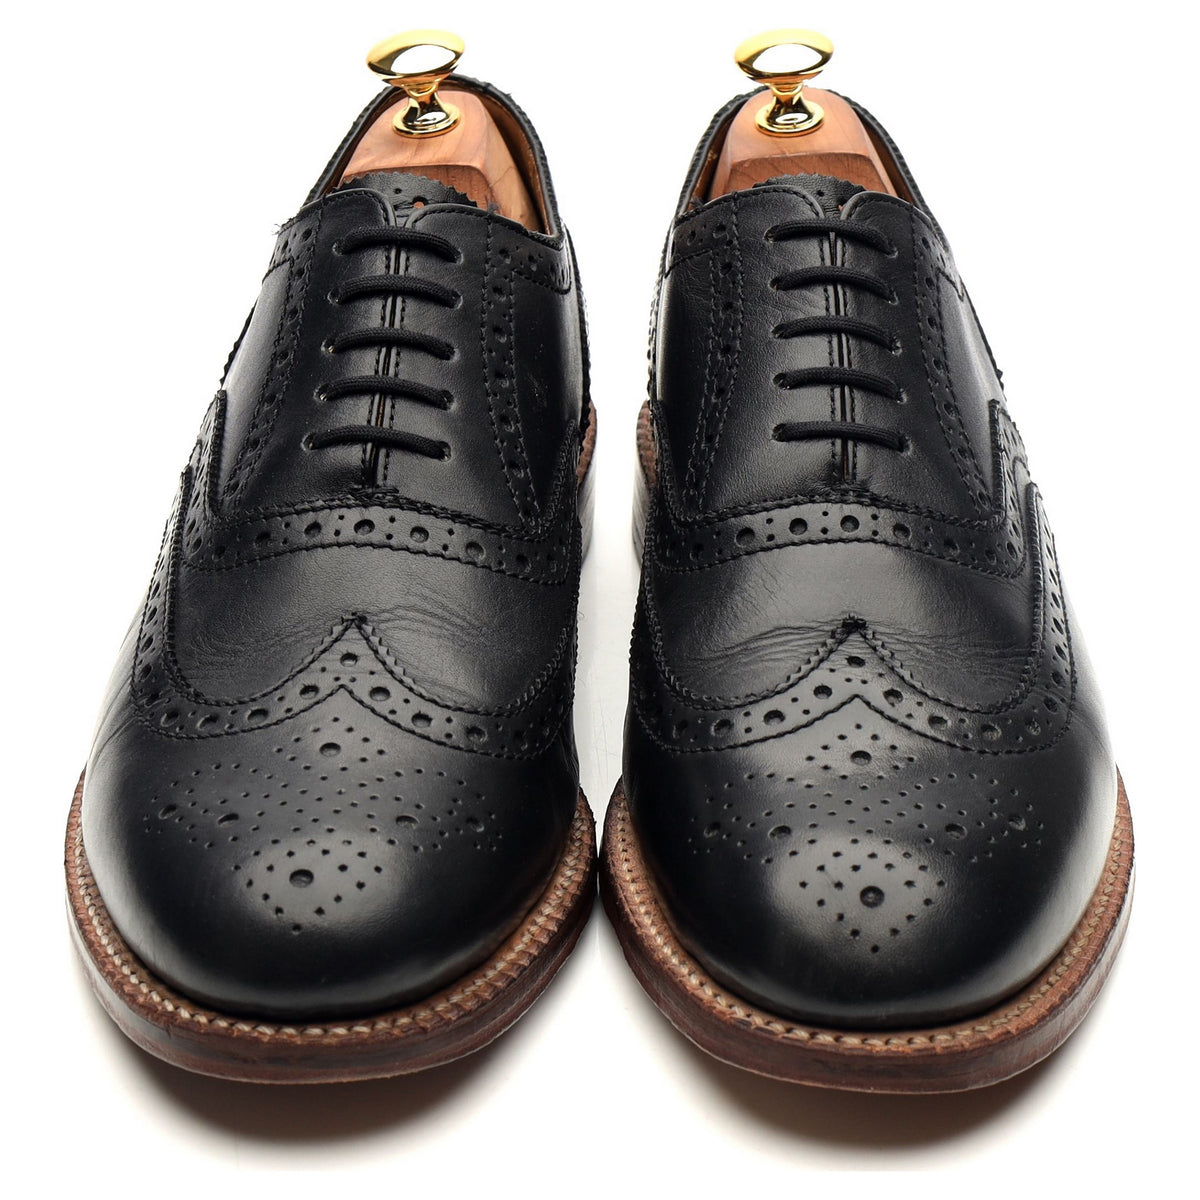 &#39;Angus&#39; Black Leather Oxford Brogues UK 10 G